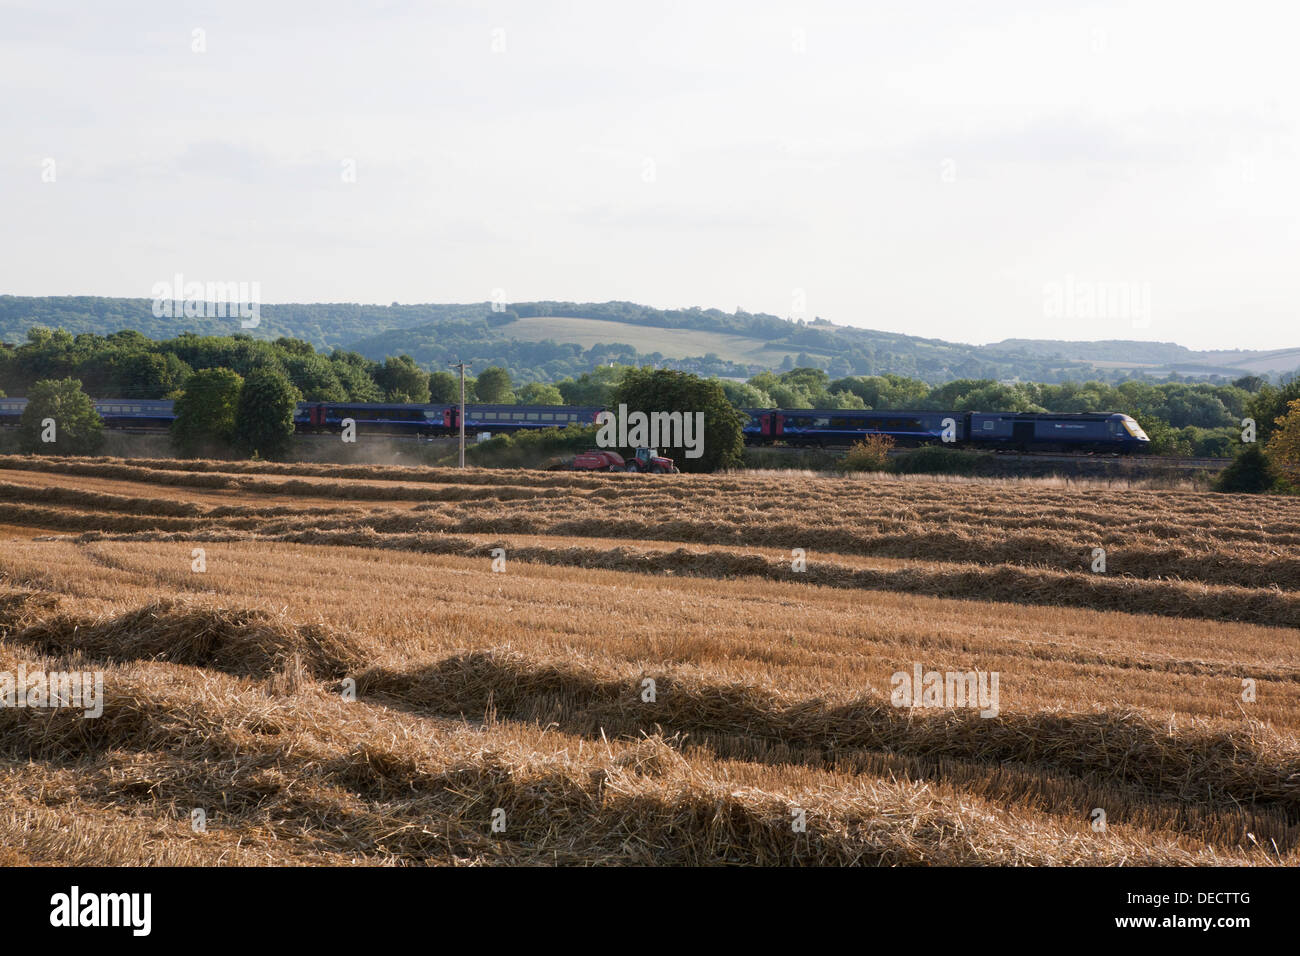 A red Massey Ferguson tractor and straw baler operating in a harvested field. A train passes by at high speed. Stock Photo